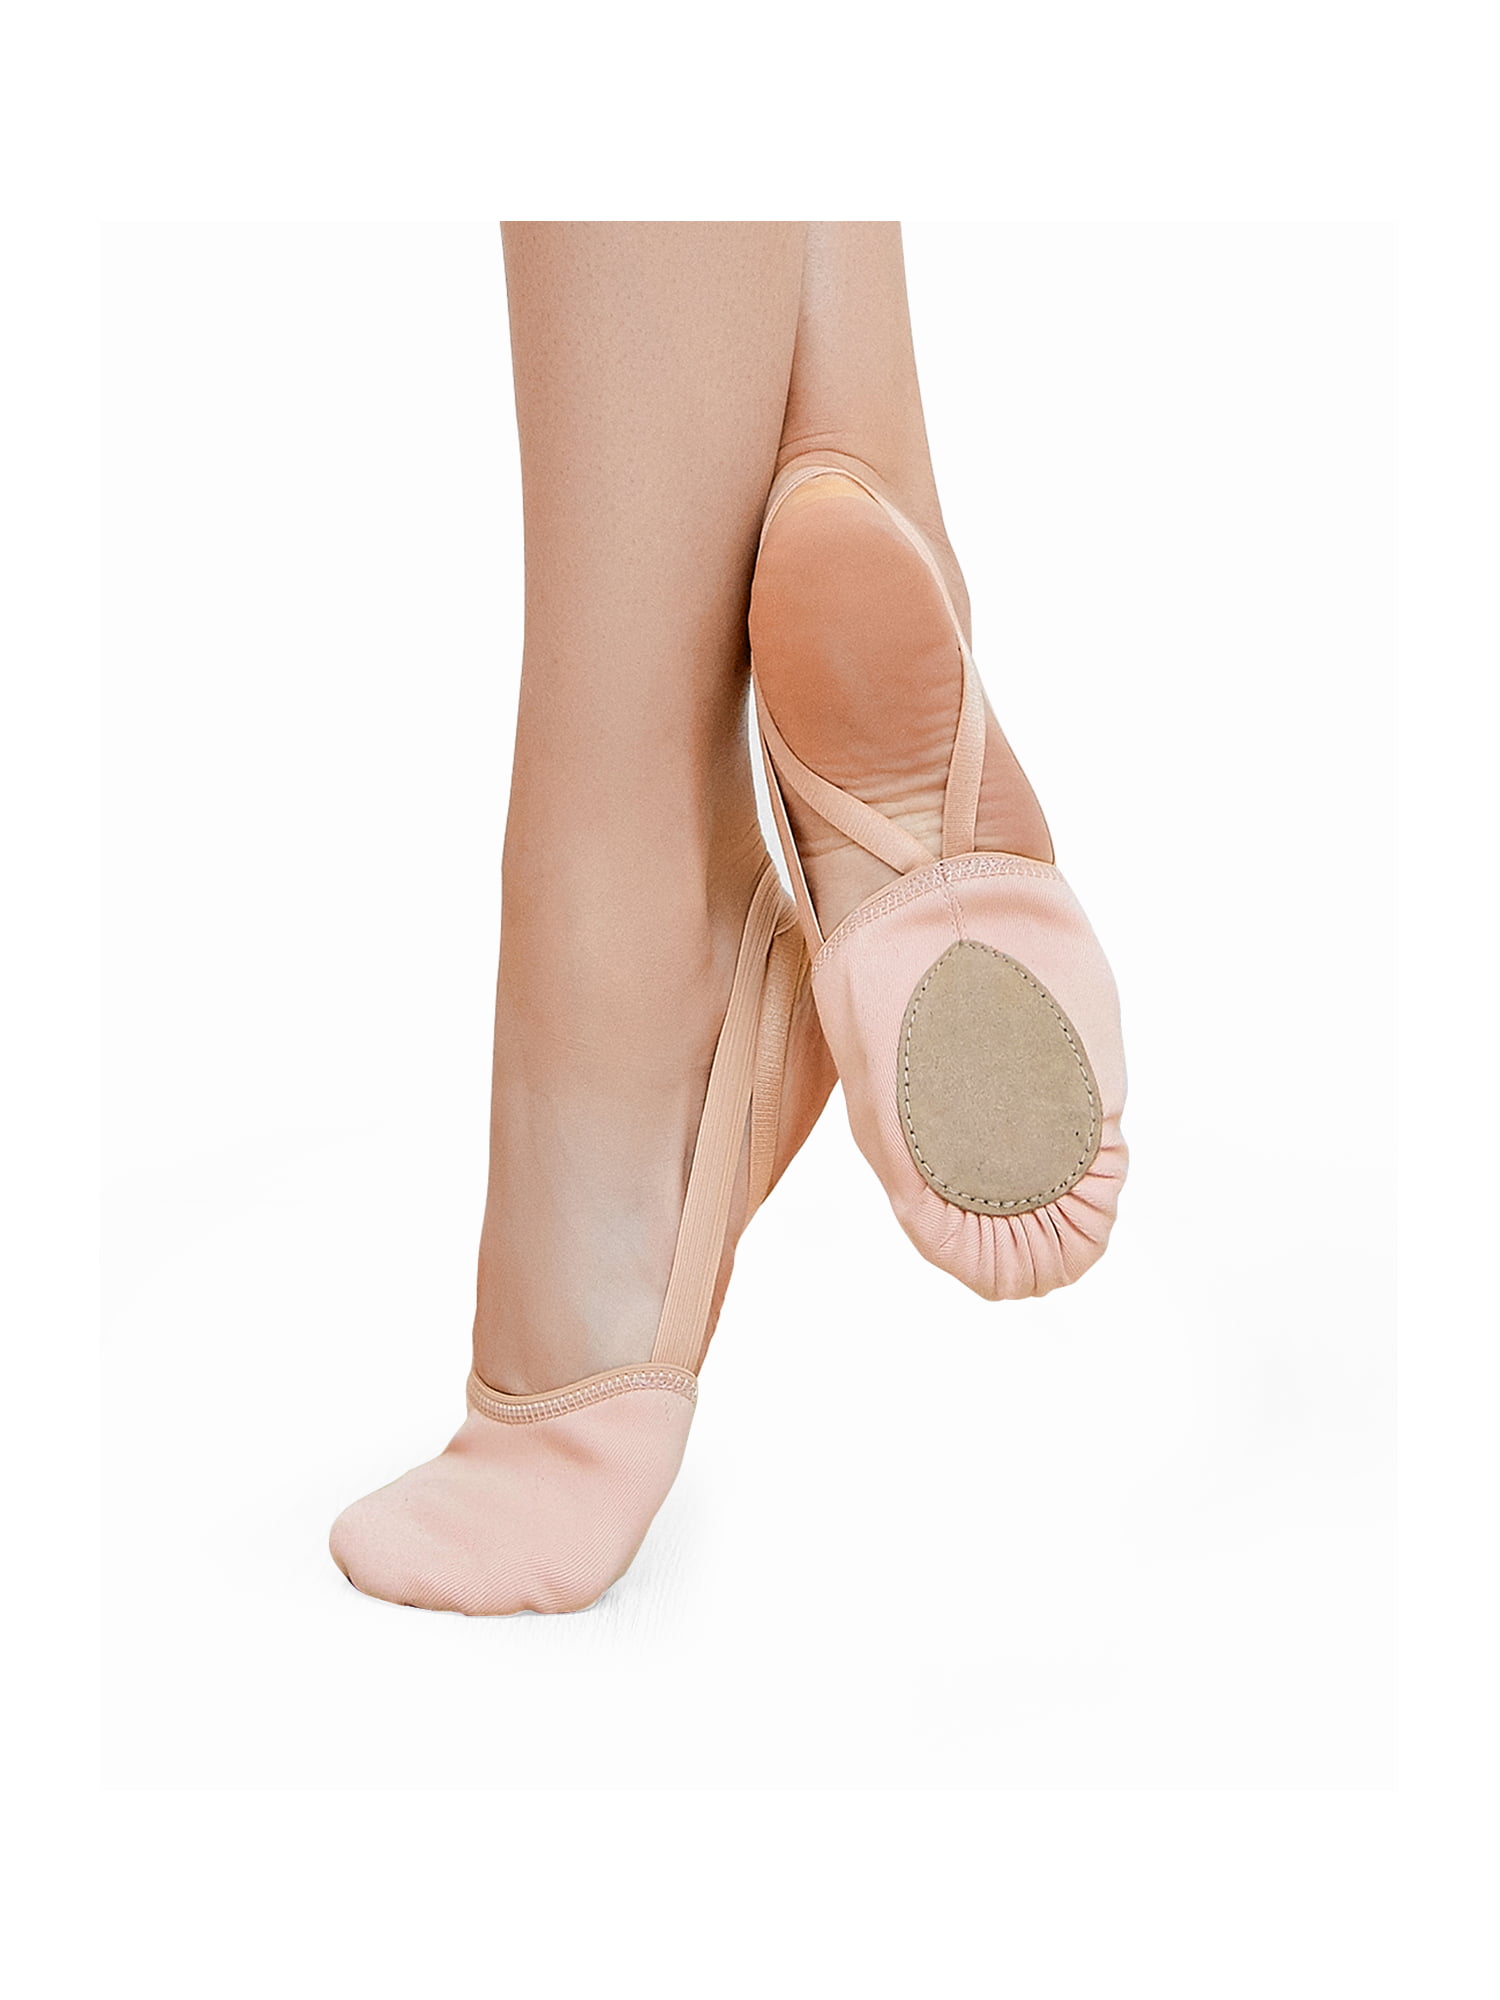 Lyrical Dance Shoes Pirouette Shoes 